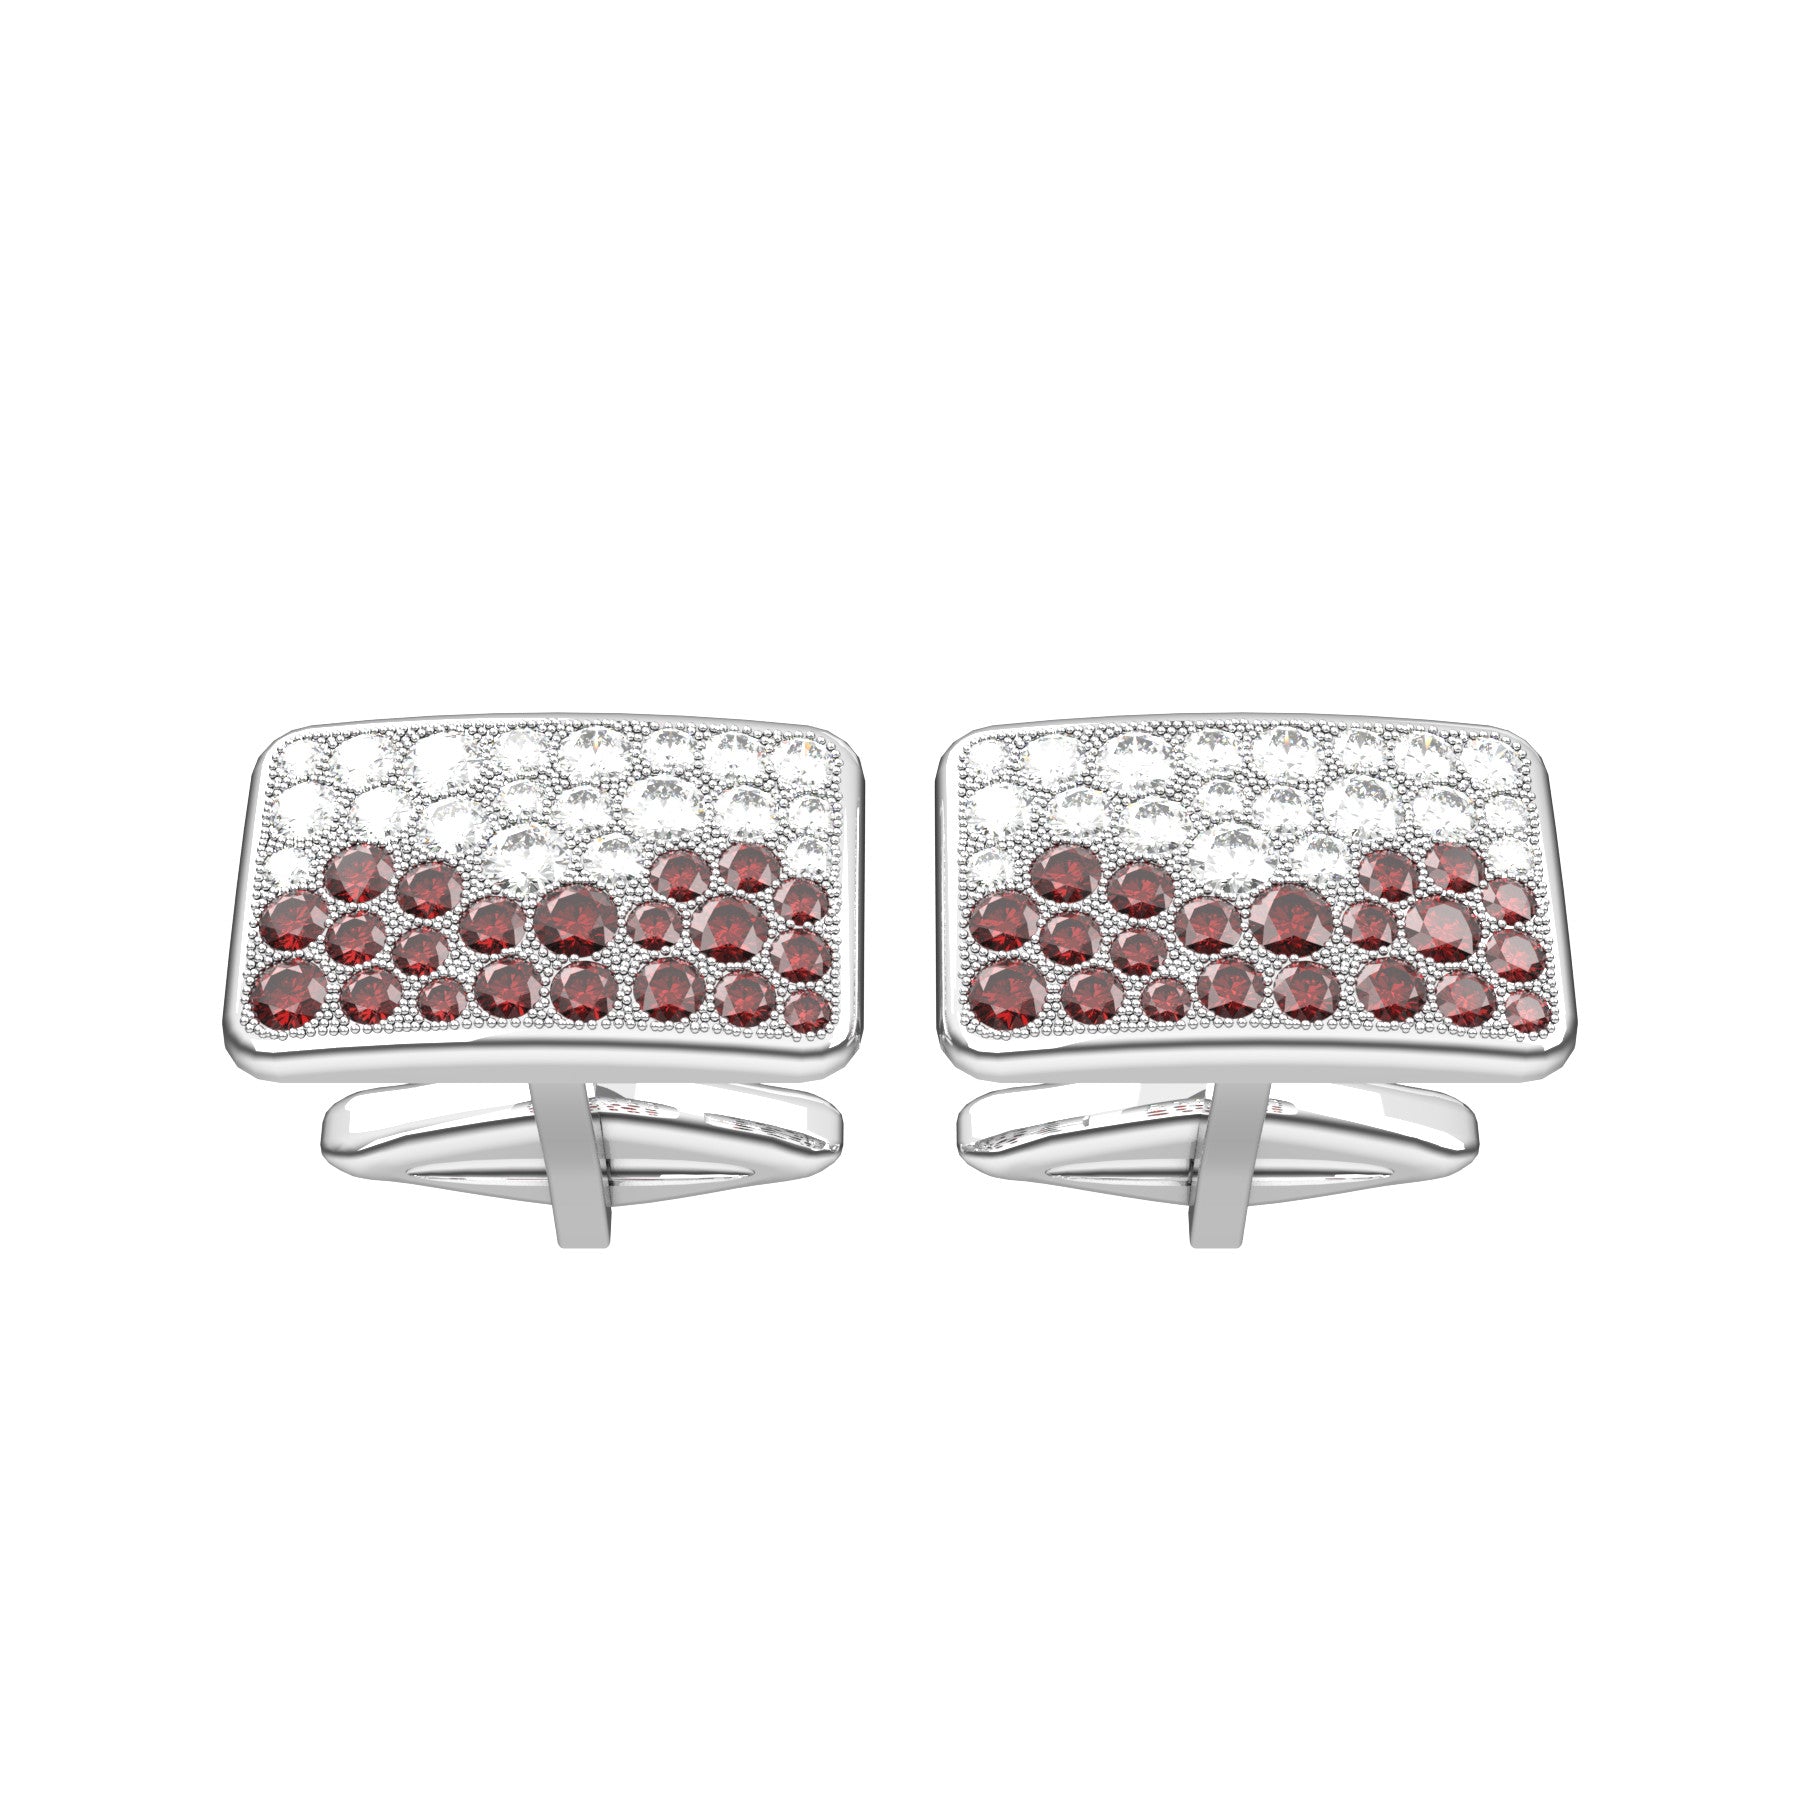 avior cufflinks, round natural diamonds and round natural rubies, 18 K white gold, weight about 8,1 g. (0.29 oz) size 12x18x2,1 mm